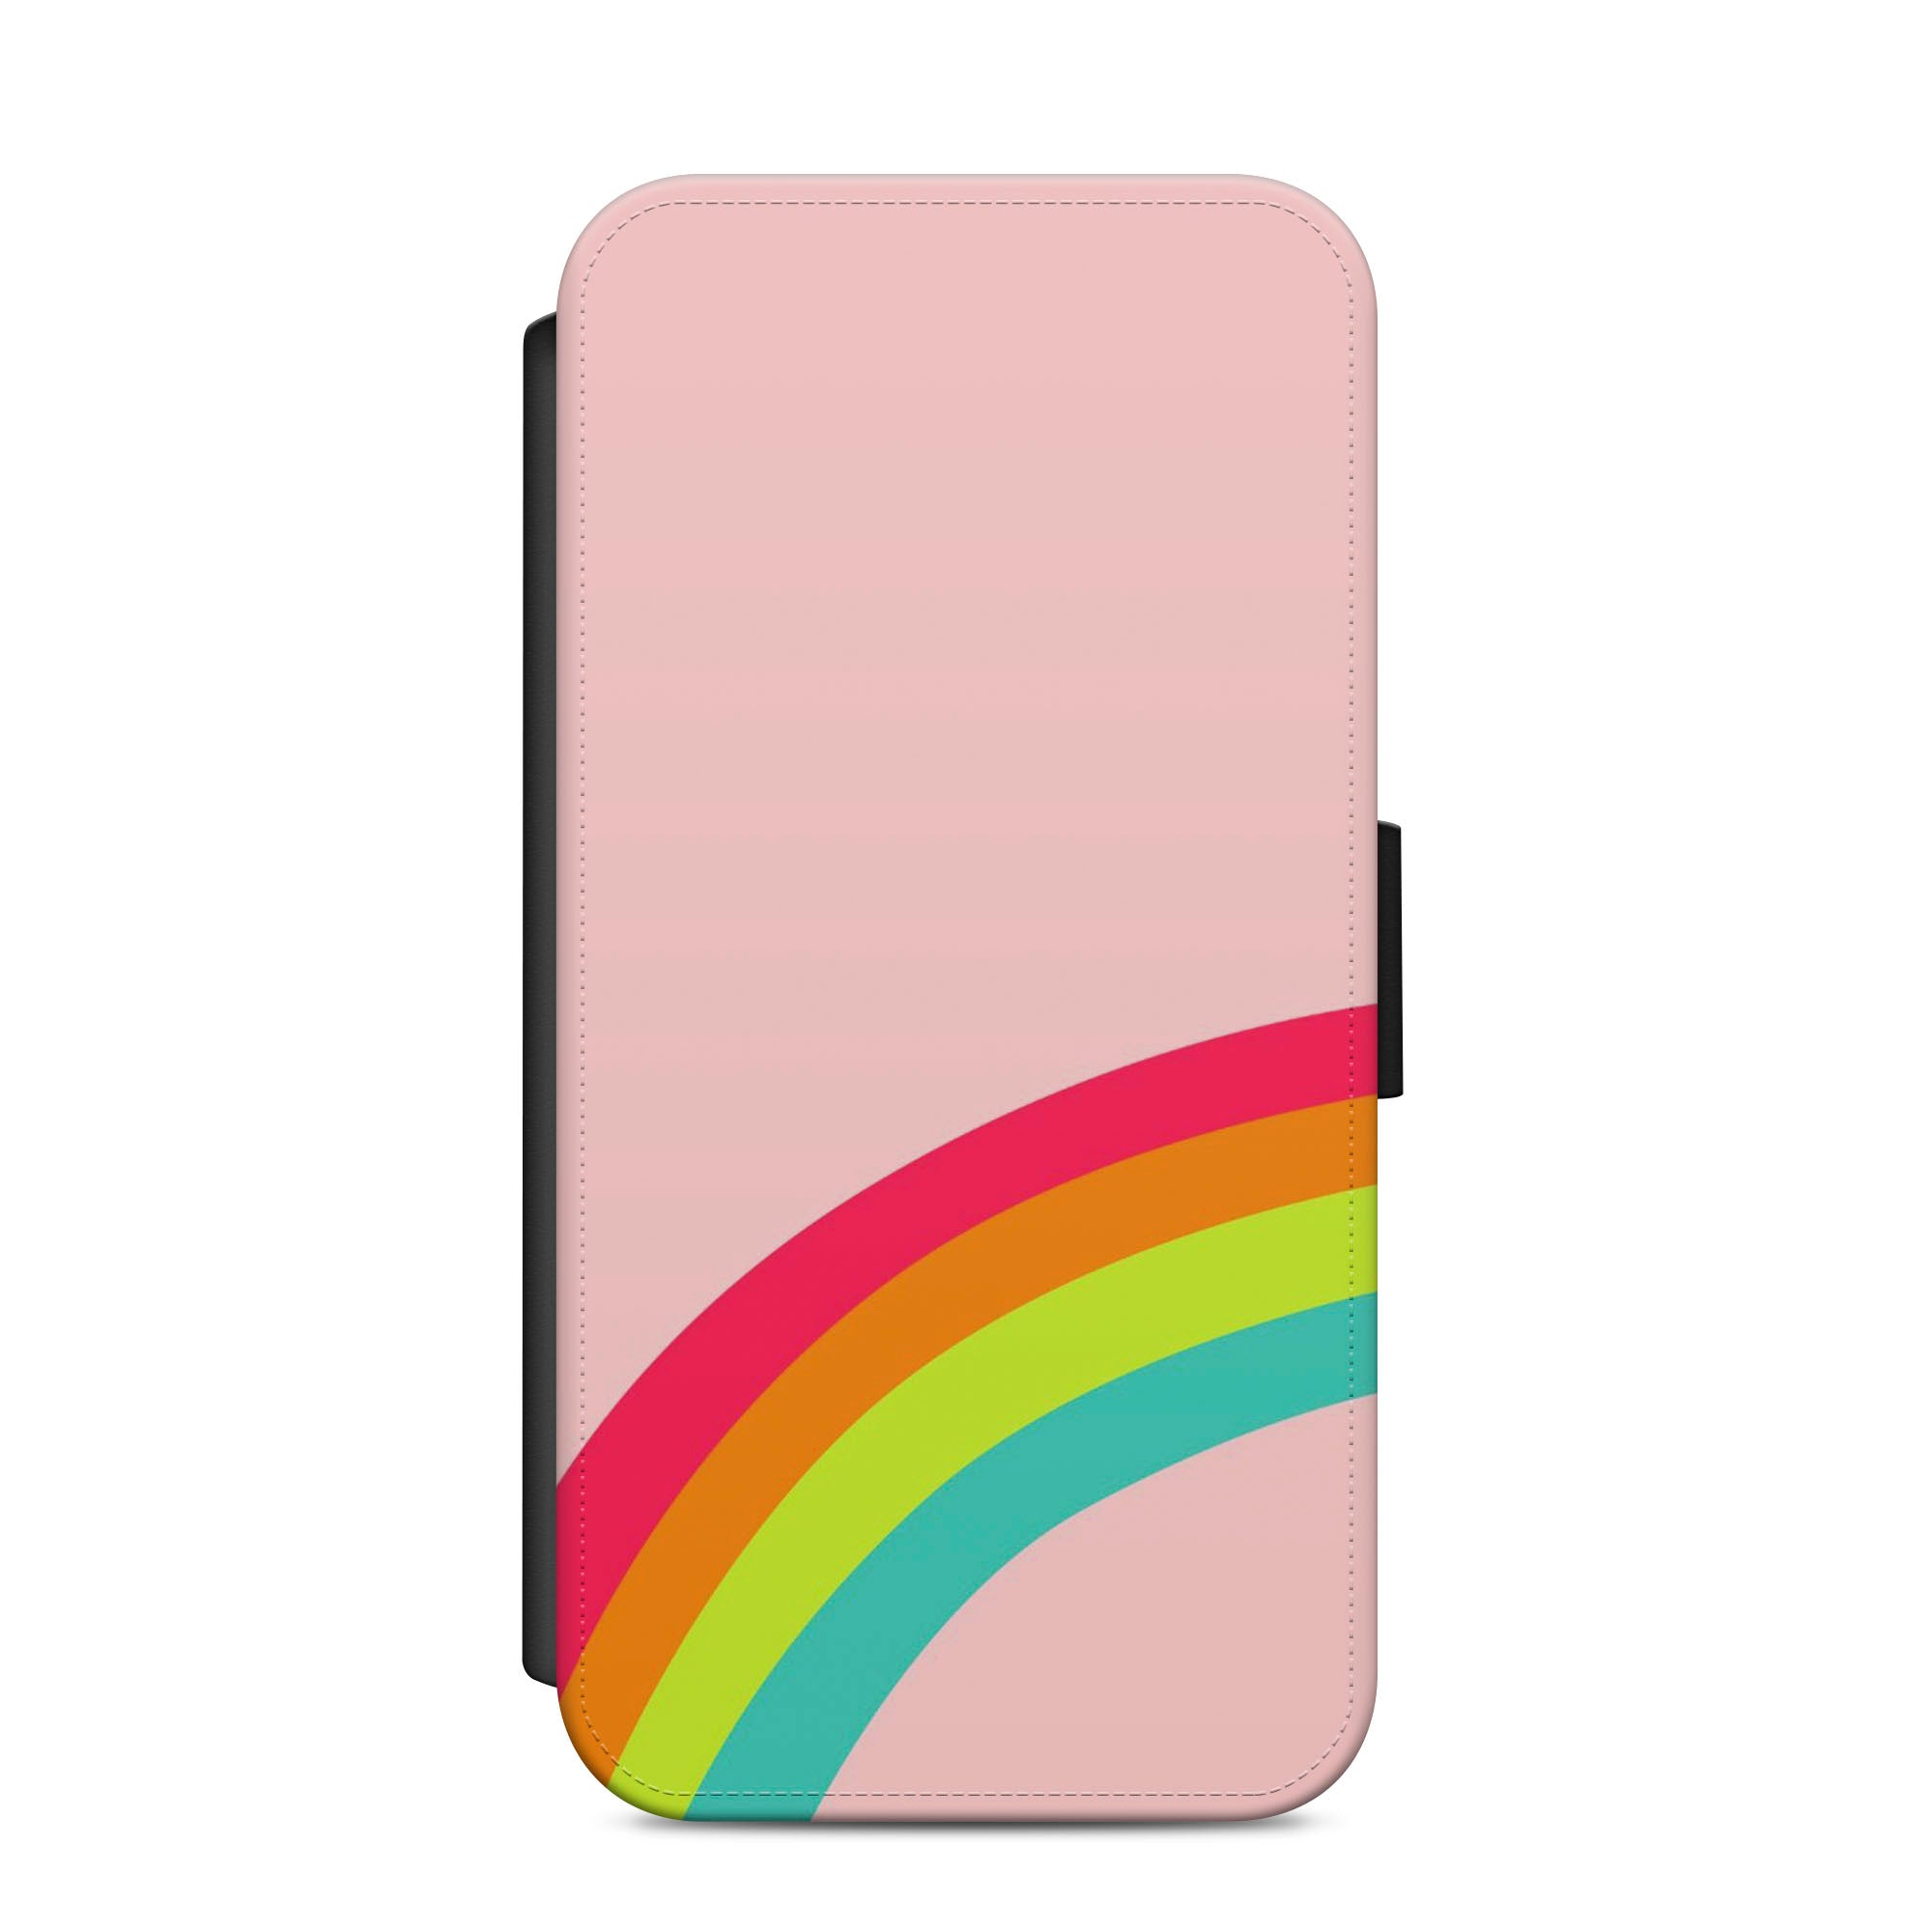 Cute Rainbow Faux Leather Flip Case Wallet for iPhone / Samsung